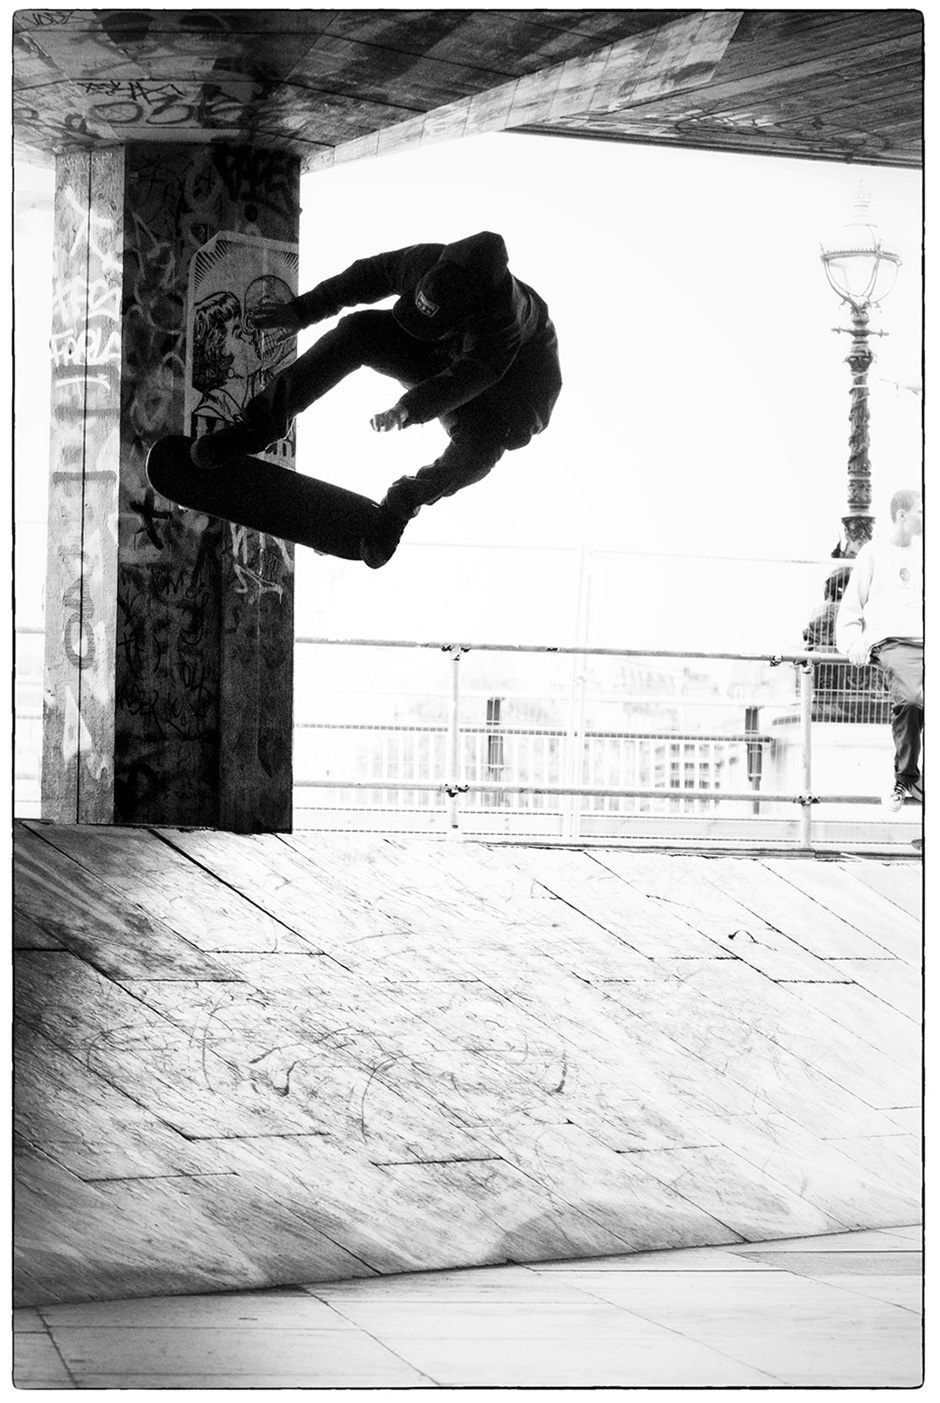 Paul Shier nollies out of a wallride on one of Southbank's sacred pillars for Andy Horsley's lens